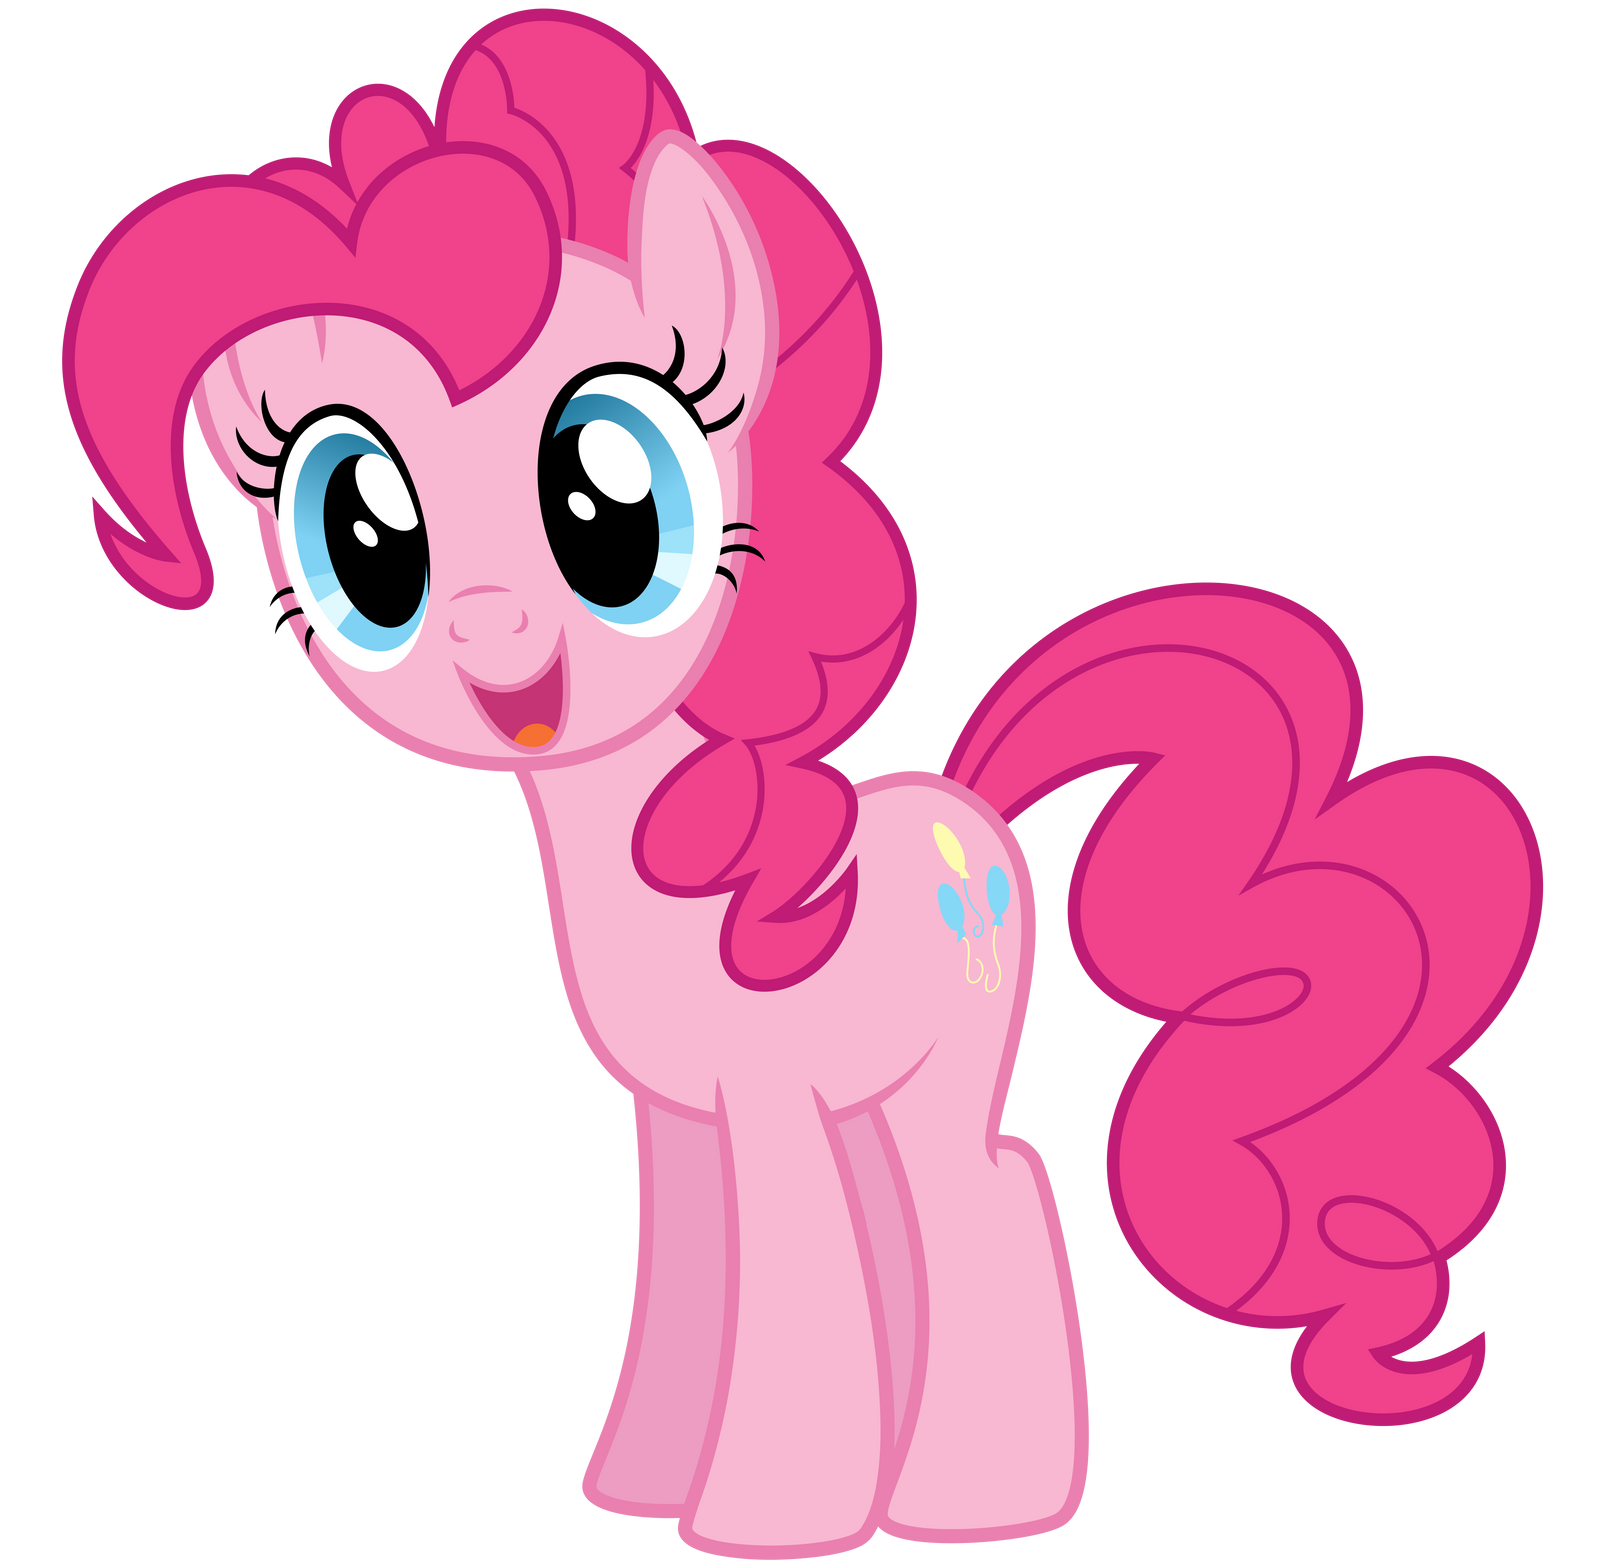 http://img01.deviantart.net/036f/i/2013/295/7/e/happy_pinkie_pie_by_thatguy1945-d6rctaq.png